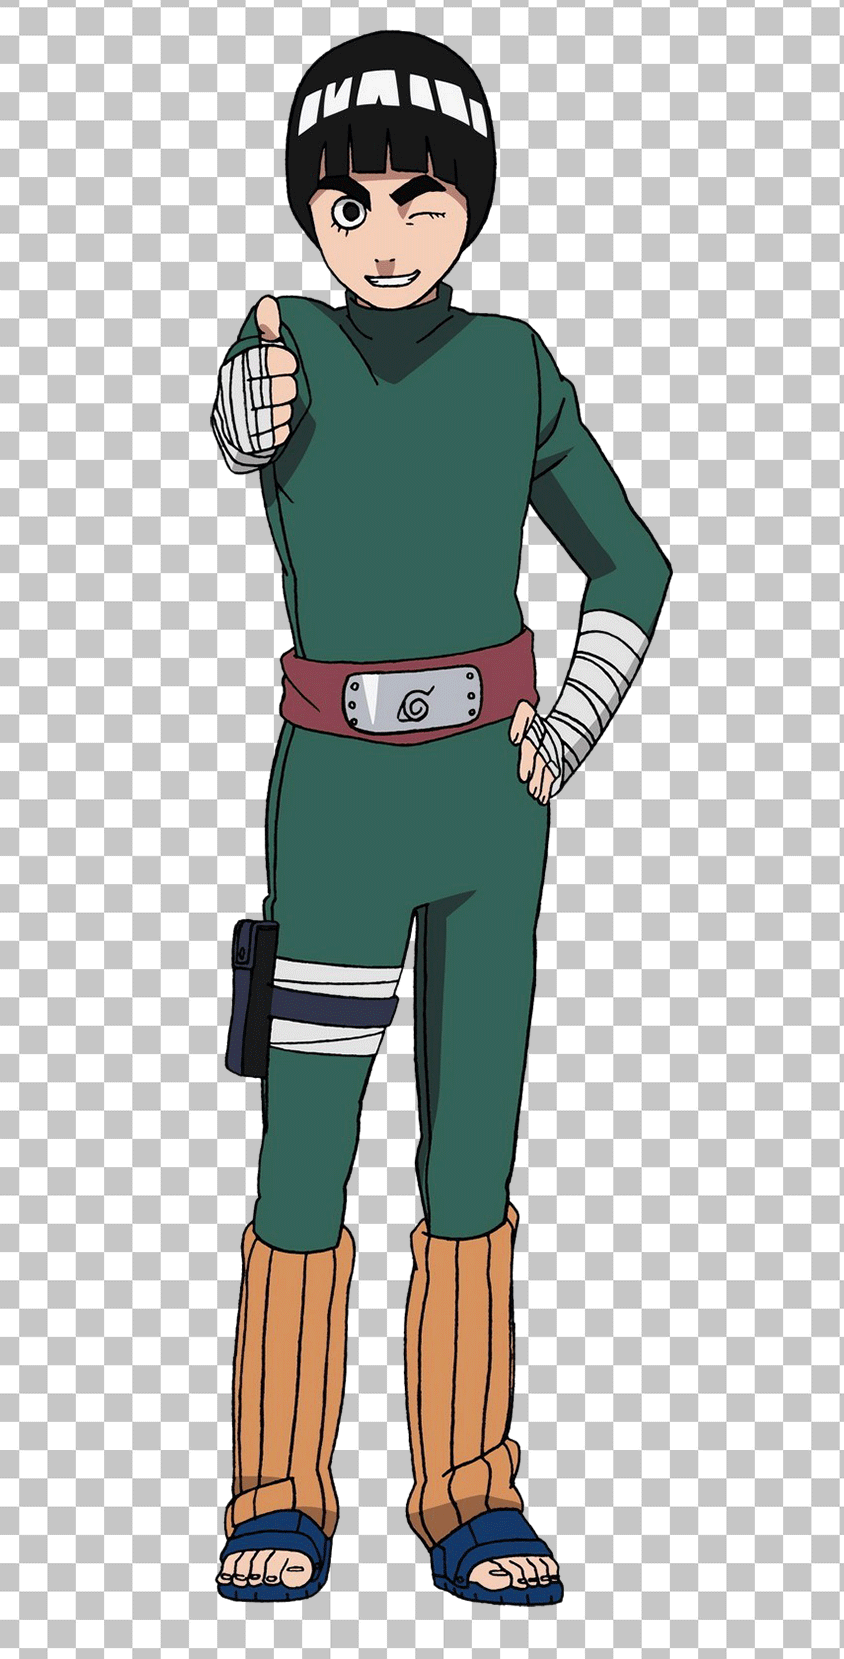 Rock Lee standing and giving Thumbs up PNG Image